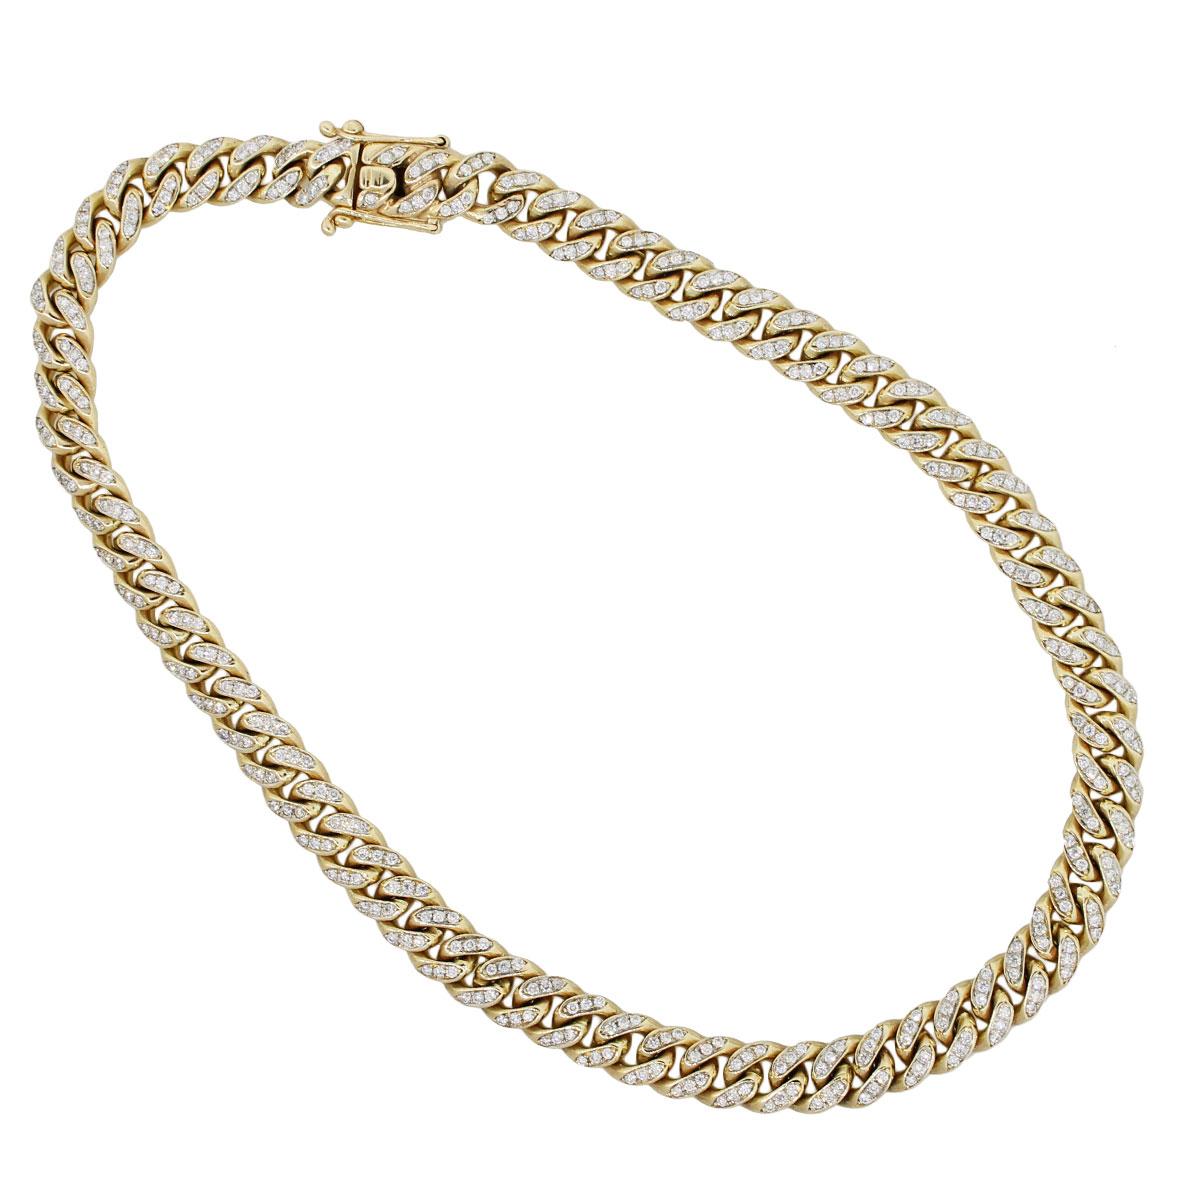 Material: 10k yellow gold
Diamond Details: Approximately 12ctw of round brilliant diamonds. Diamonds are H/I in color, VS-SI in clarity
Measurements: Necklace measures 18.25″ in length.
Fastening: Tongue in box clasp with double safety latch
Item